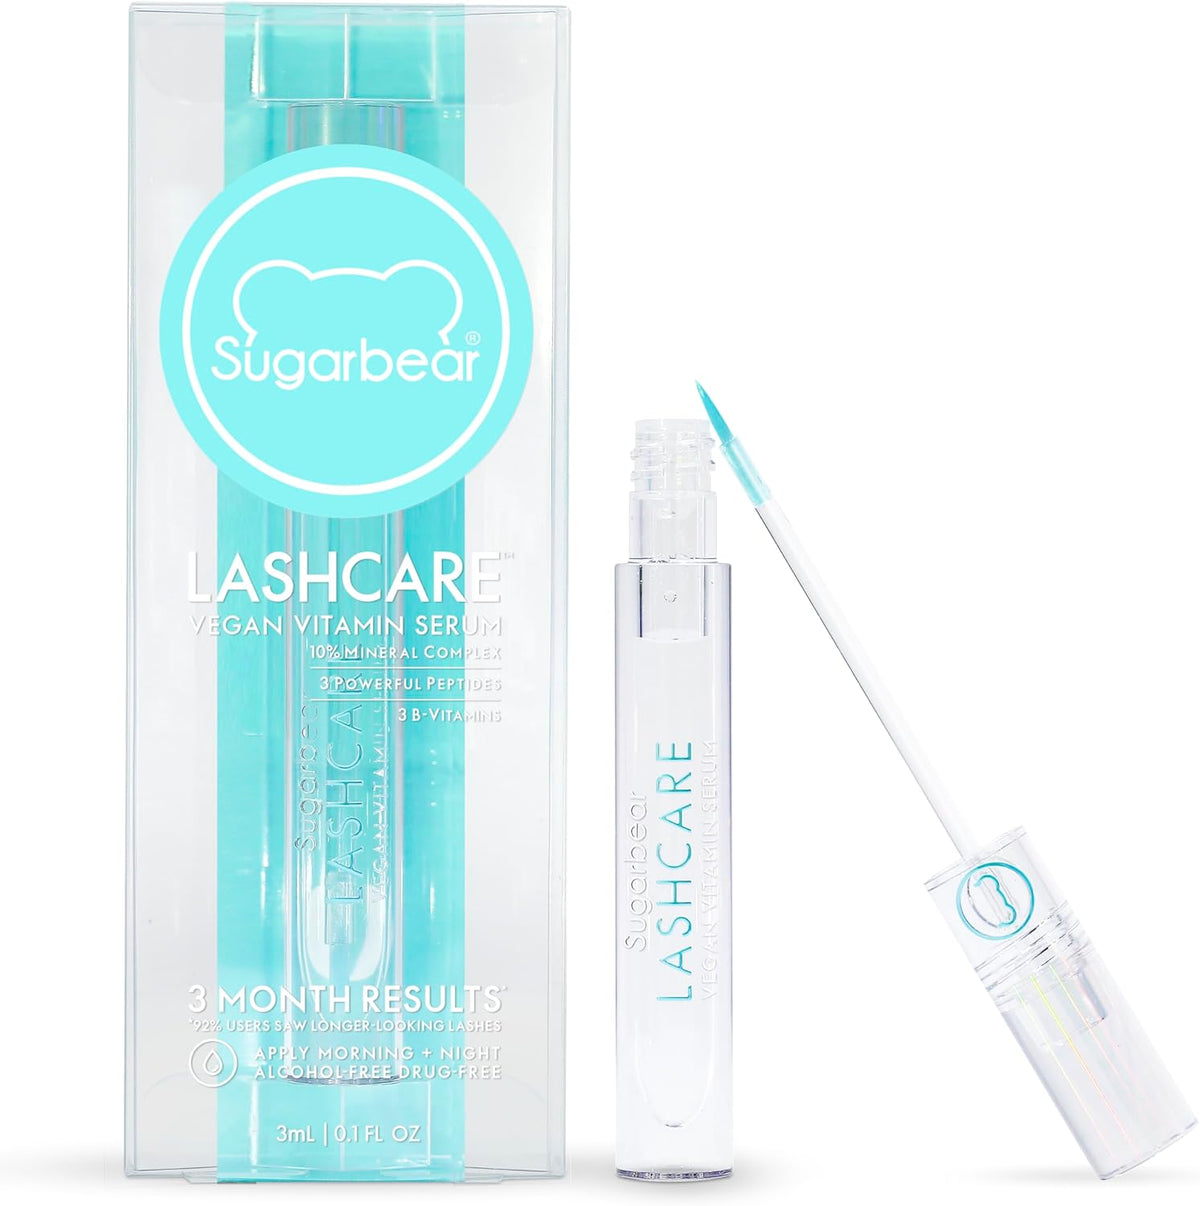 SUGARBEAR® LashCare Vegan Vitamin-Infused Lash Serum, Halal Certified, Alcohol Free - 3 Month Supply, Promotes Appearance of Longer, Thicker Eyelashes